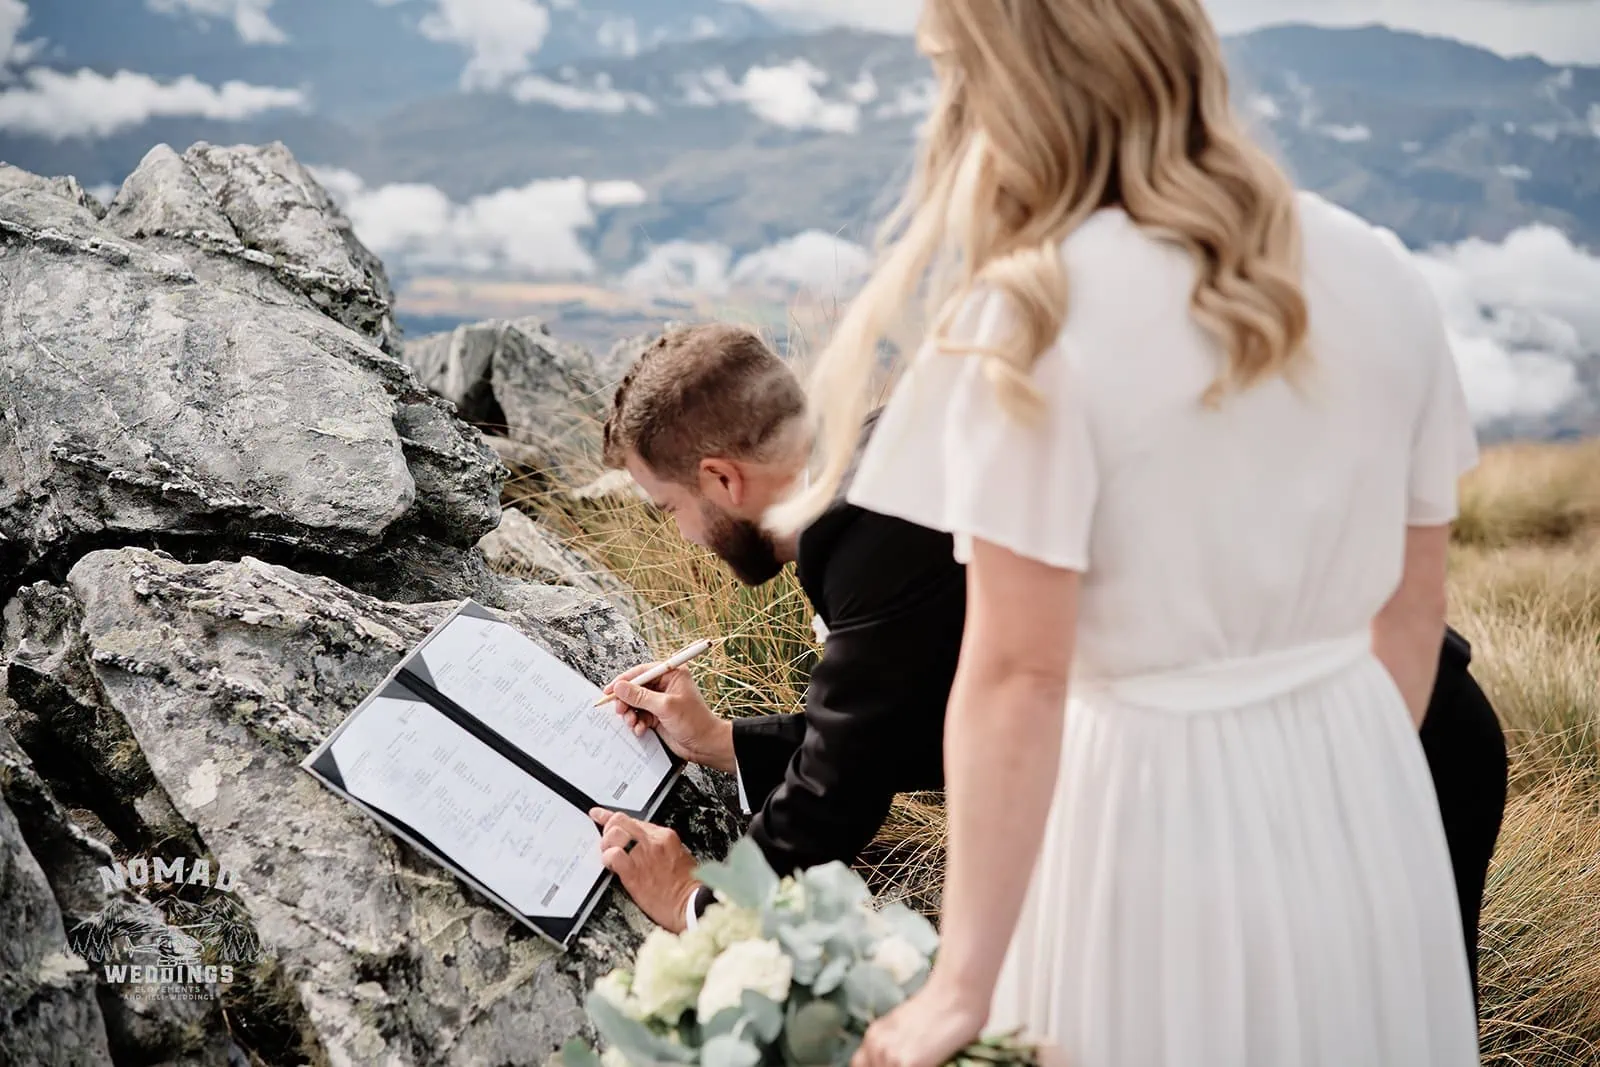 Queenstown New Zealand Elopement Wedding Photographer - A bride and groom signing their wedding vows on top of a mountain in NZ, during the summer.